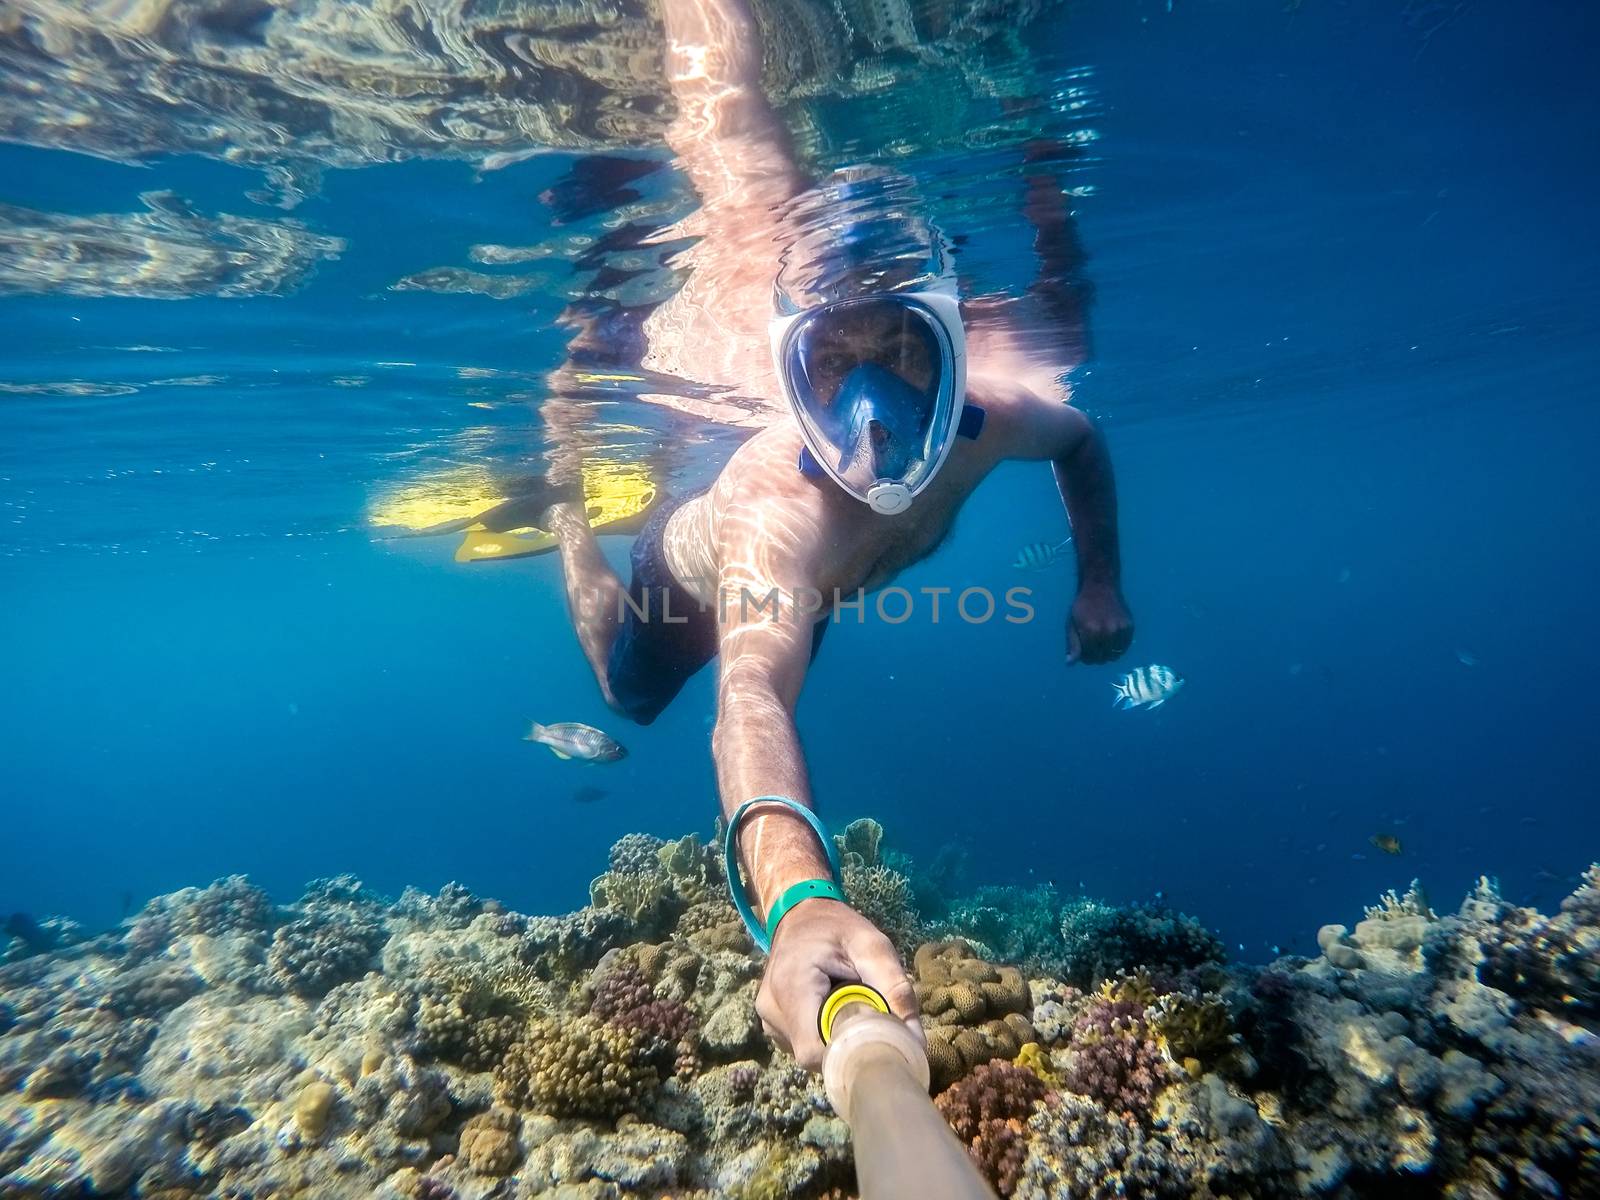 Snorkel swim in underwater exotic tropics paradise with fish and coral reef, beautiful view of tropical sea. Egypt, Marsa Alam. Summer holiday vacation concept